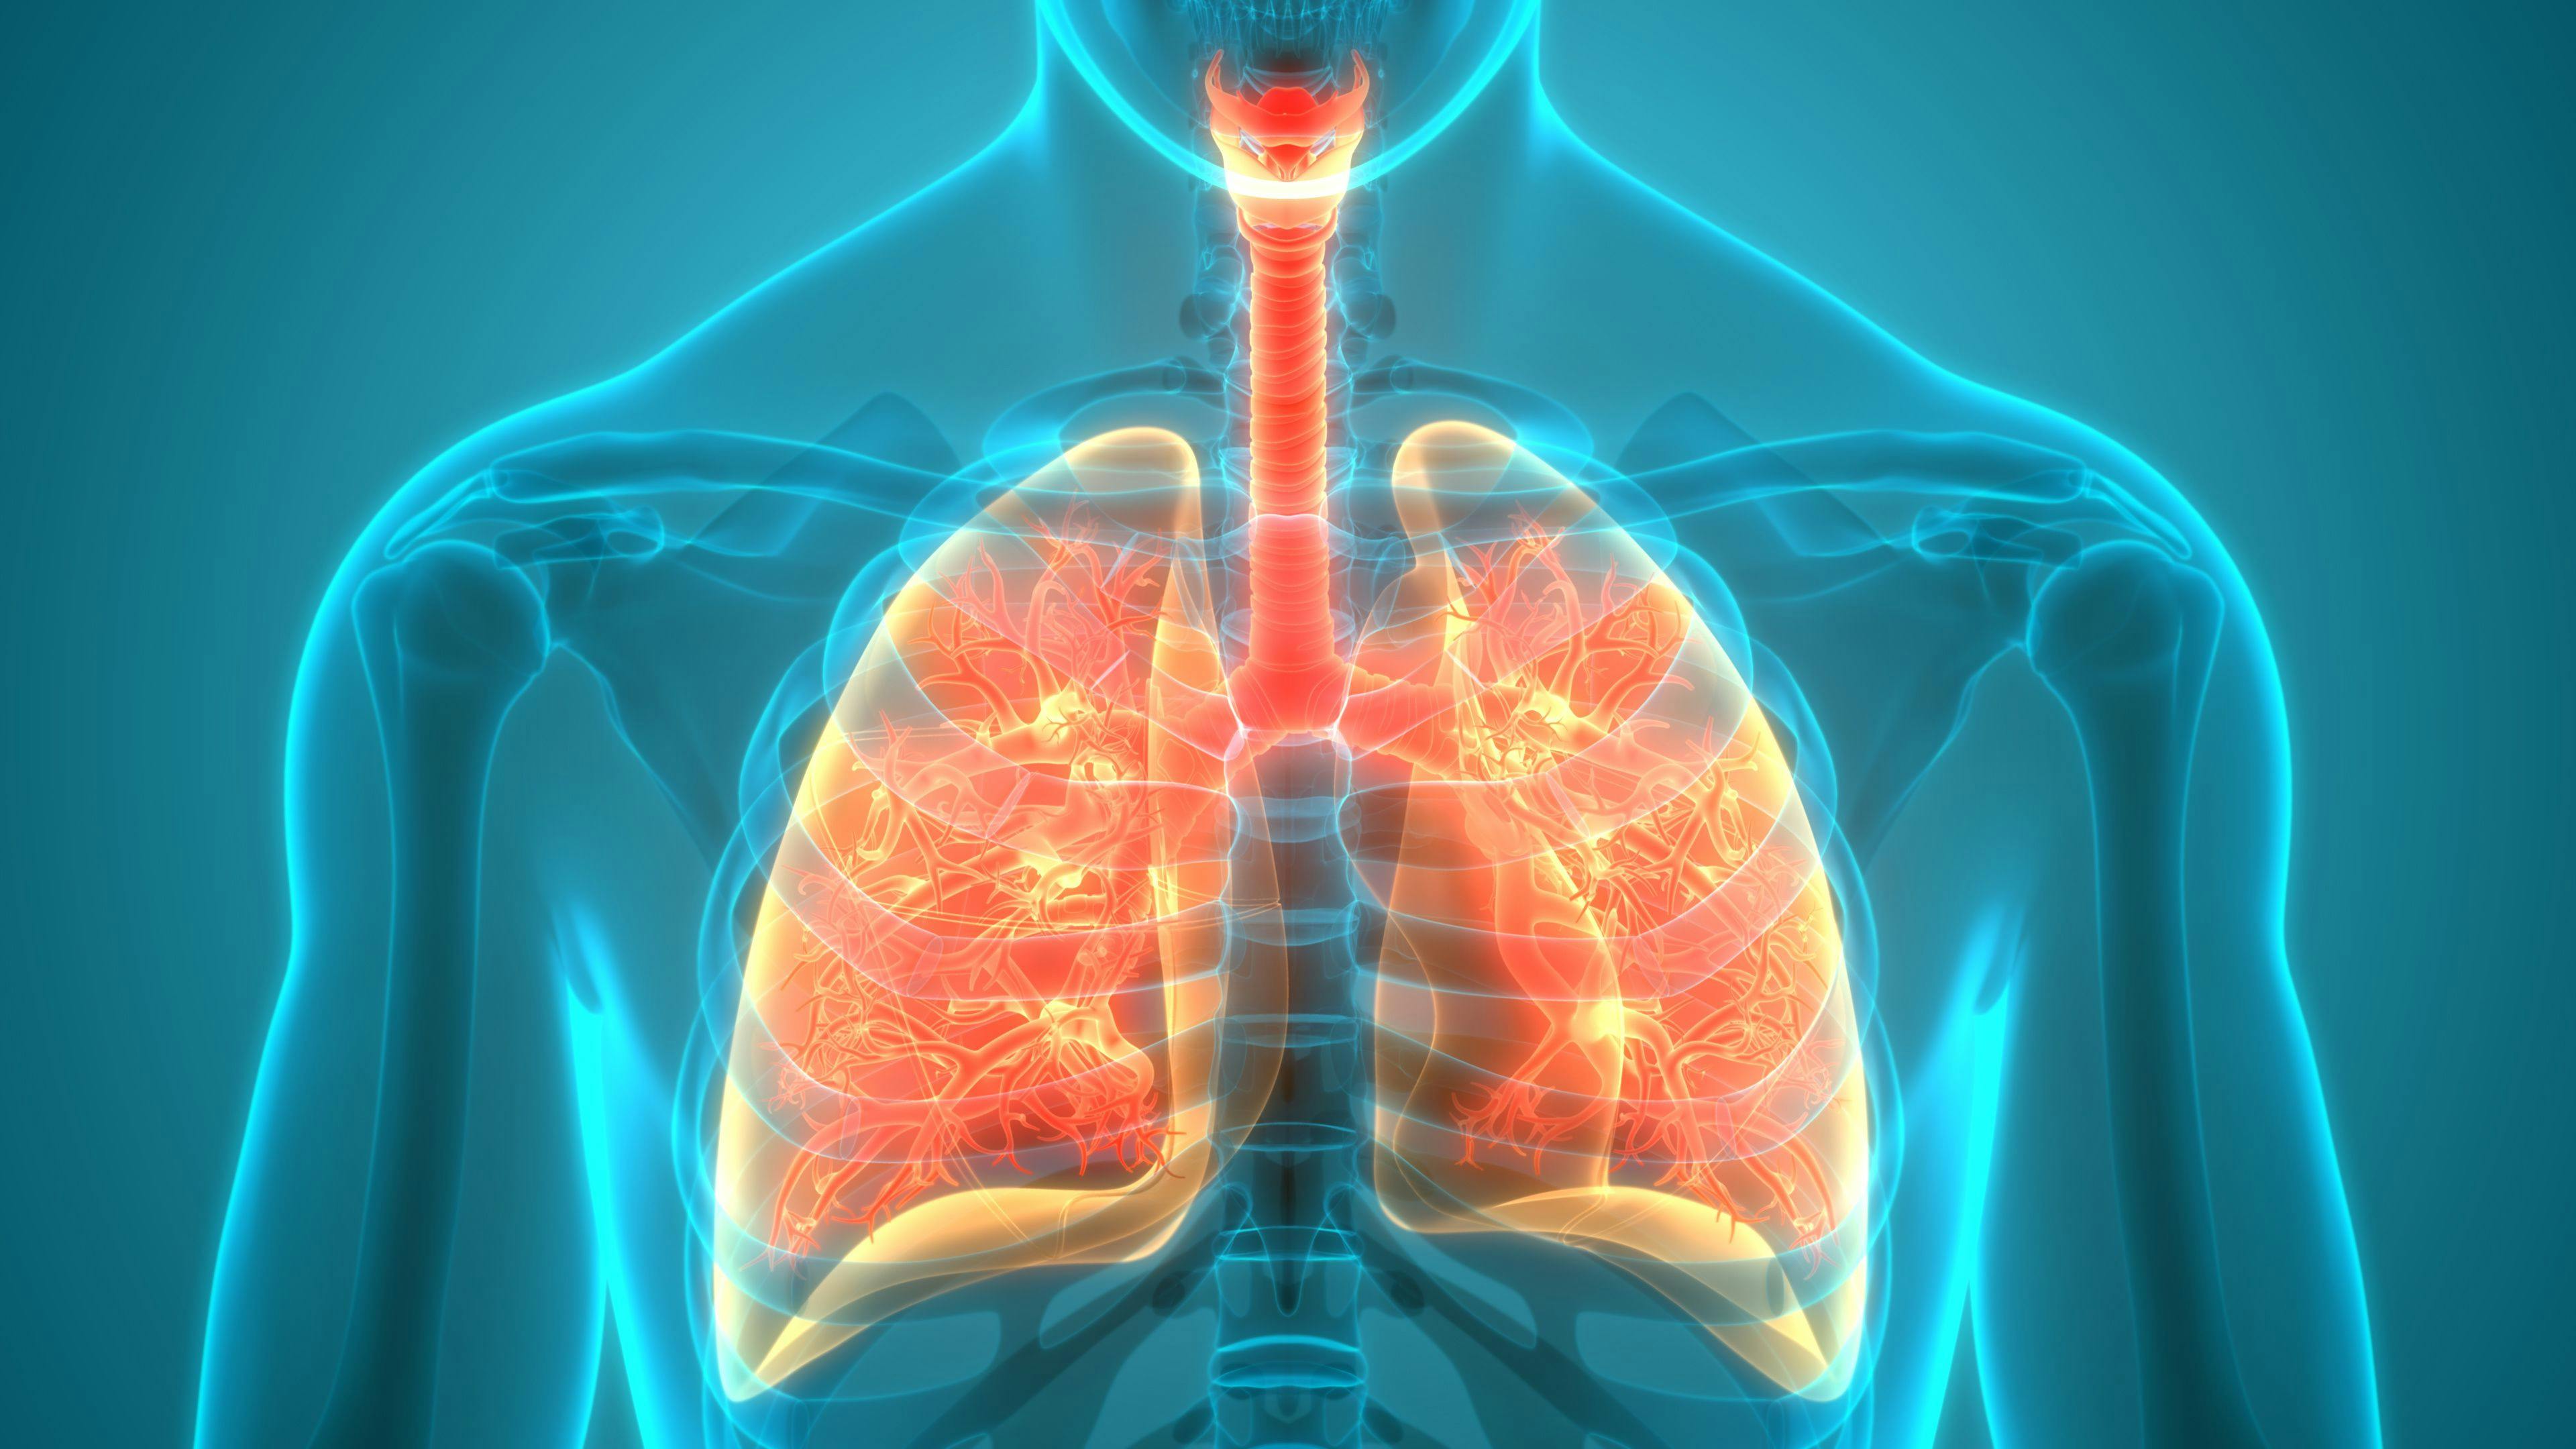  Pralsetinib Shows Durable Activity in Chinese Patient With RET Fusion+ NSCLC